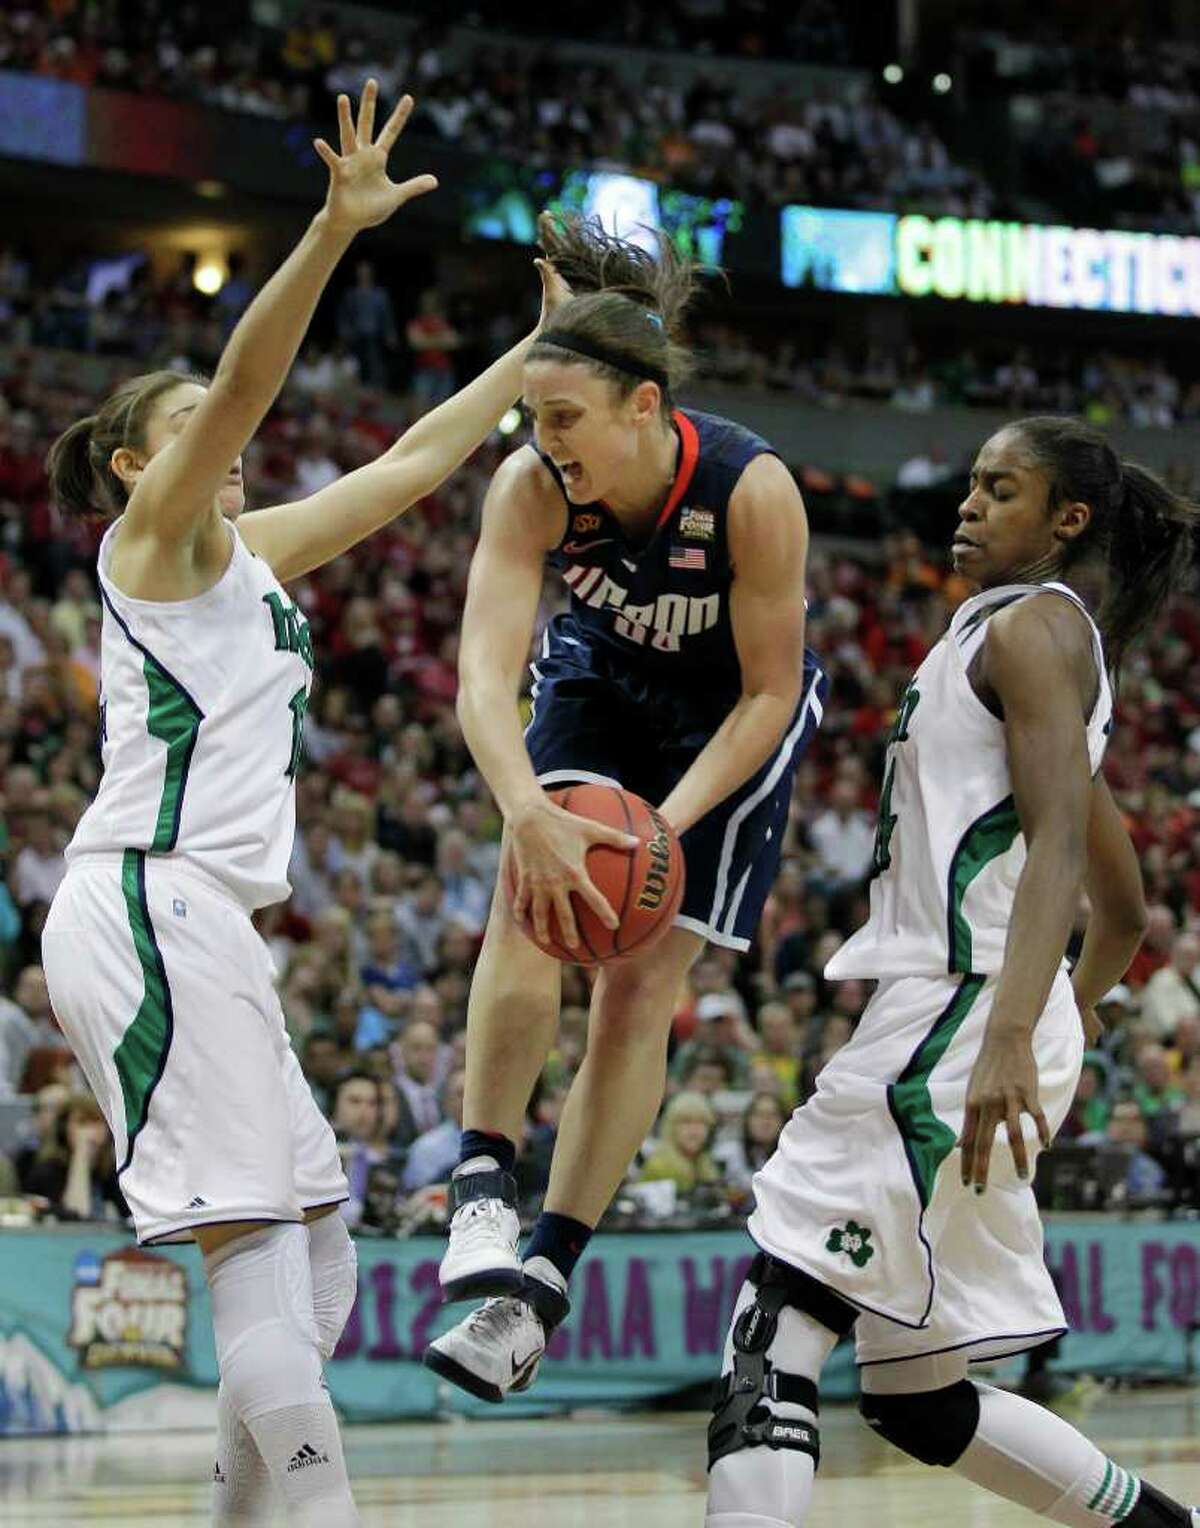 Connecticut guard Kelly Faris (34) passes between Notre Dame forward Natalie Achonwa (11) and Notre Dame forward Devereaux Peters (14) during overtime in the NCAA women's Final Four semifinal college basketball game, in Denver, Sunday, April 1, 2012. Notre Dame won 83-75. (AP Photo/Julie Jacobson)